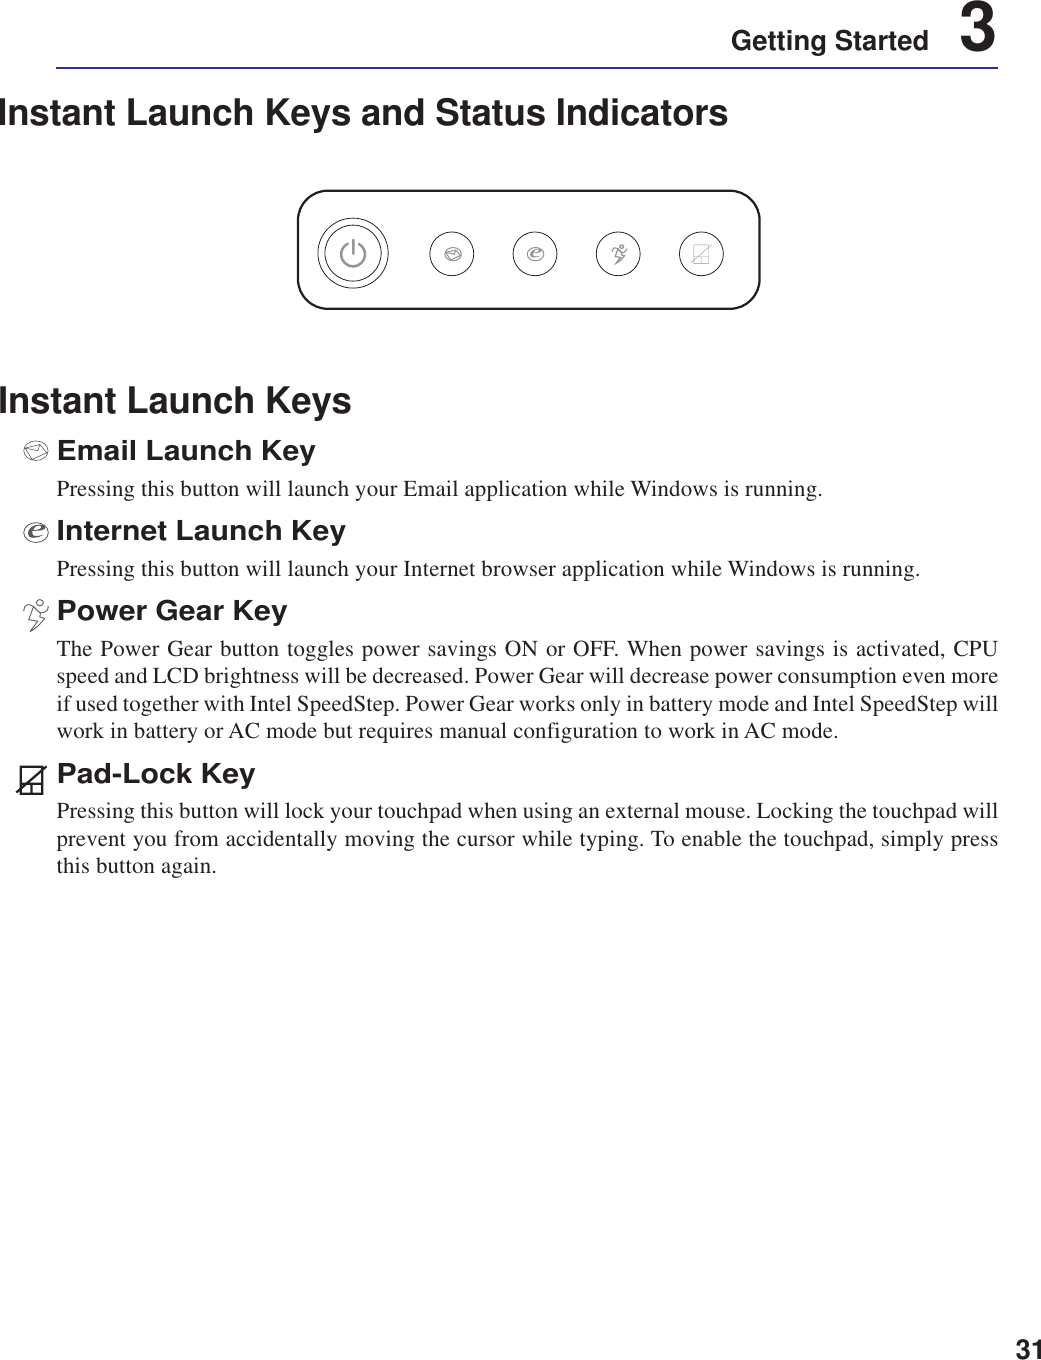 31Getting Started    3Instant Launch KeysEmail Launch KeyPressing this button will launch your Email application while Windows is running.Internet Launch KeyPressing this button will launch your Internet browser application while Windows is running.Power Gear KeyThe Power Gear button toggles power savings ON or OFF. When power savings is activated, CPUspeed and LCD brightness will be decreased. Power Gear will decrease power consumption even moreif used together with Intel SpeedStep. Power Gear works only in battery mode and Intel SpeedStep willwork in battery or AC mode but requires manual configuration to work in AC mode.Pad-Lock KeyPressing this button will lock your touchpad when using an external mouse. Locking the touchpad willprevent you from accidentally moving the cursor while typing. To enable the touchpad, simply pressthis button again.Instant Launch Keys and Status Indicators